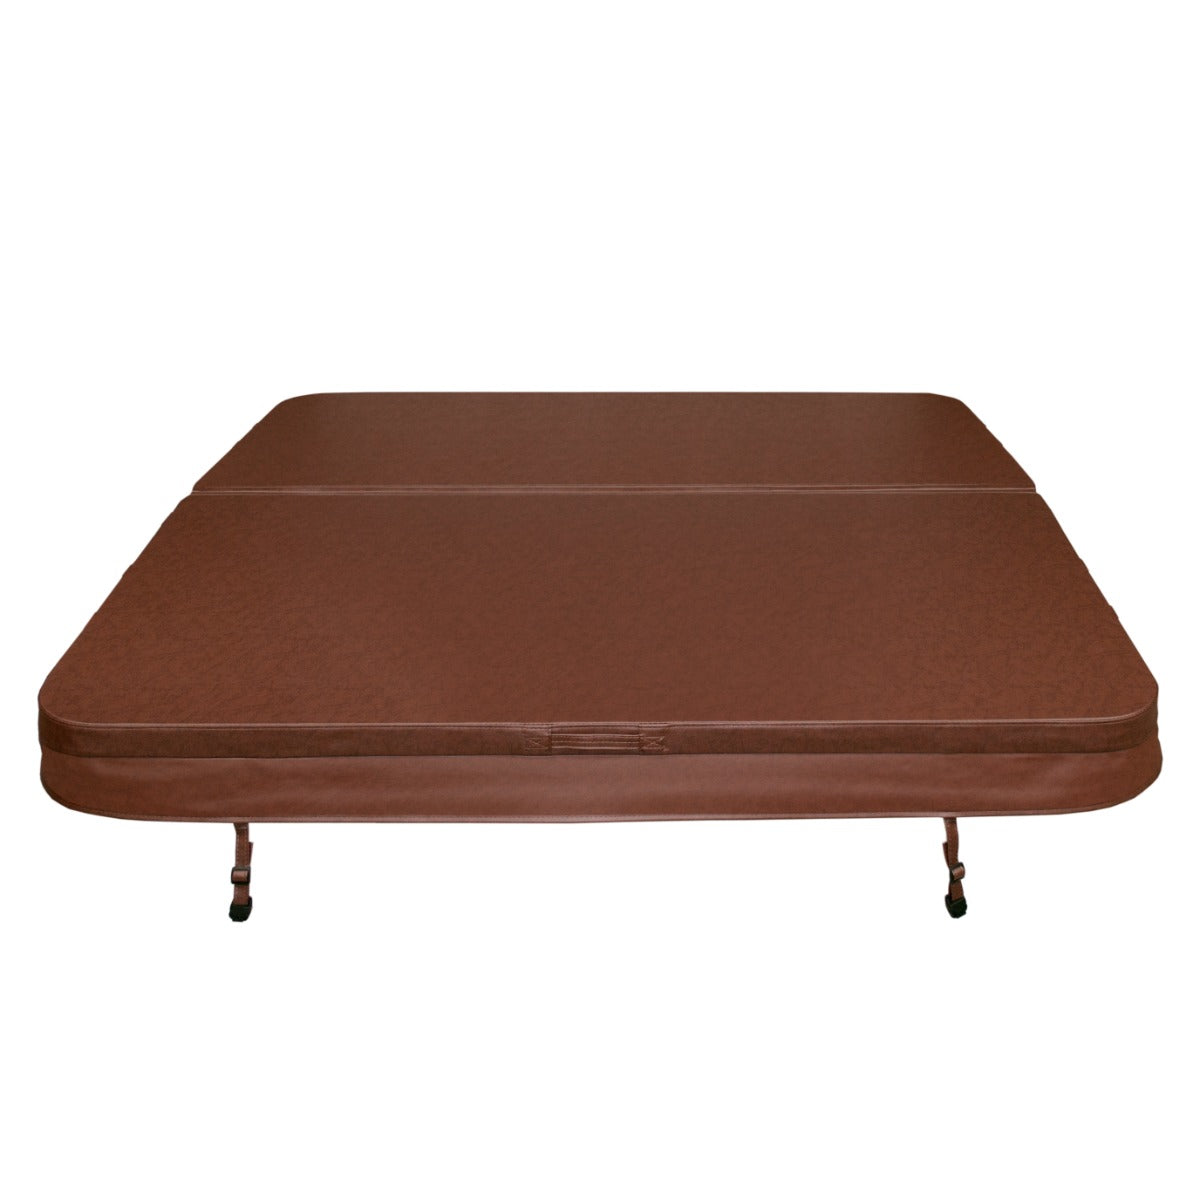 2.2m Hot Tub Spa Cover – Brown